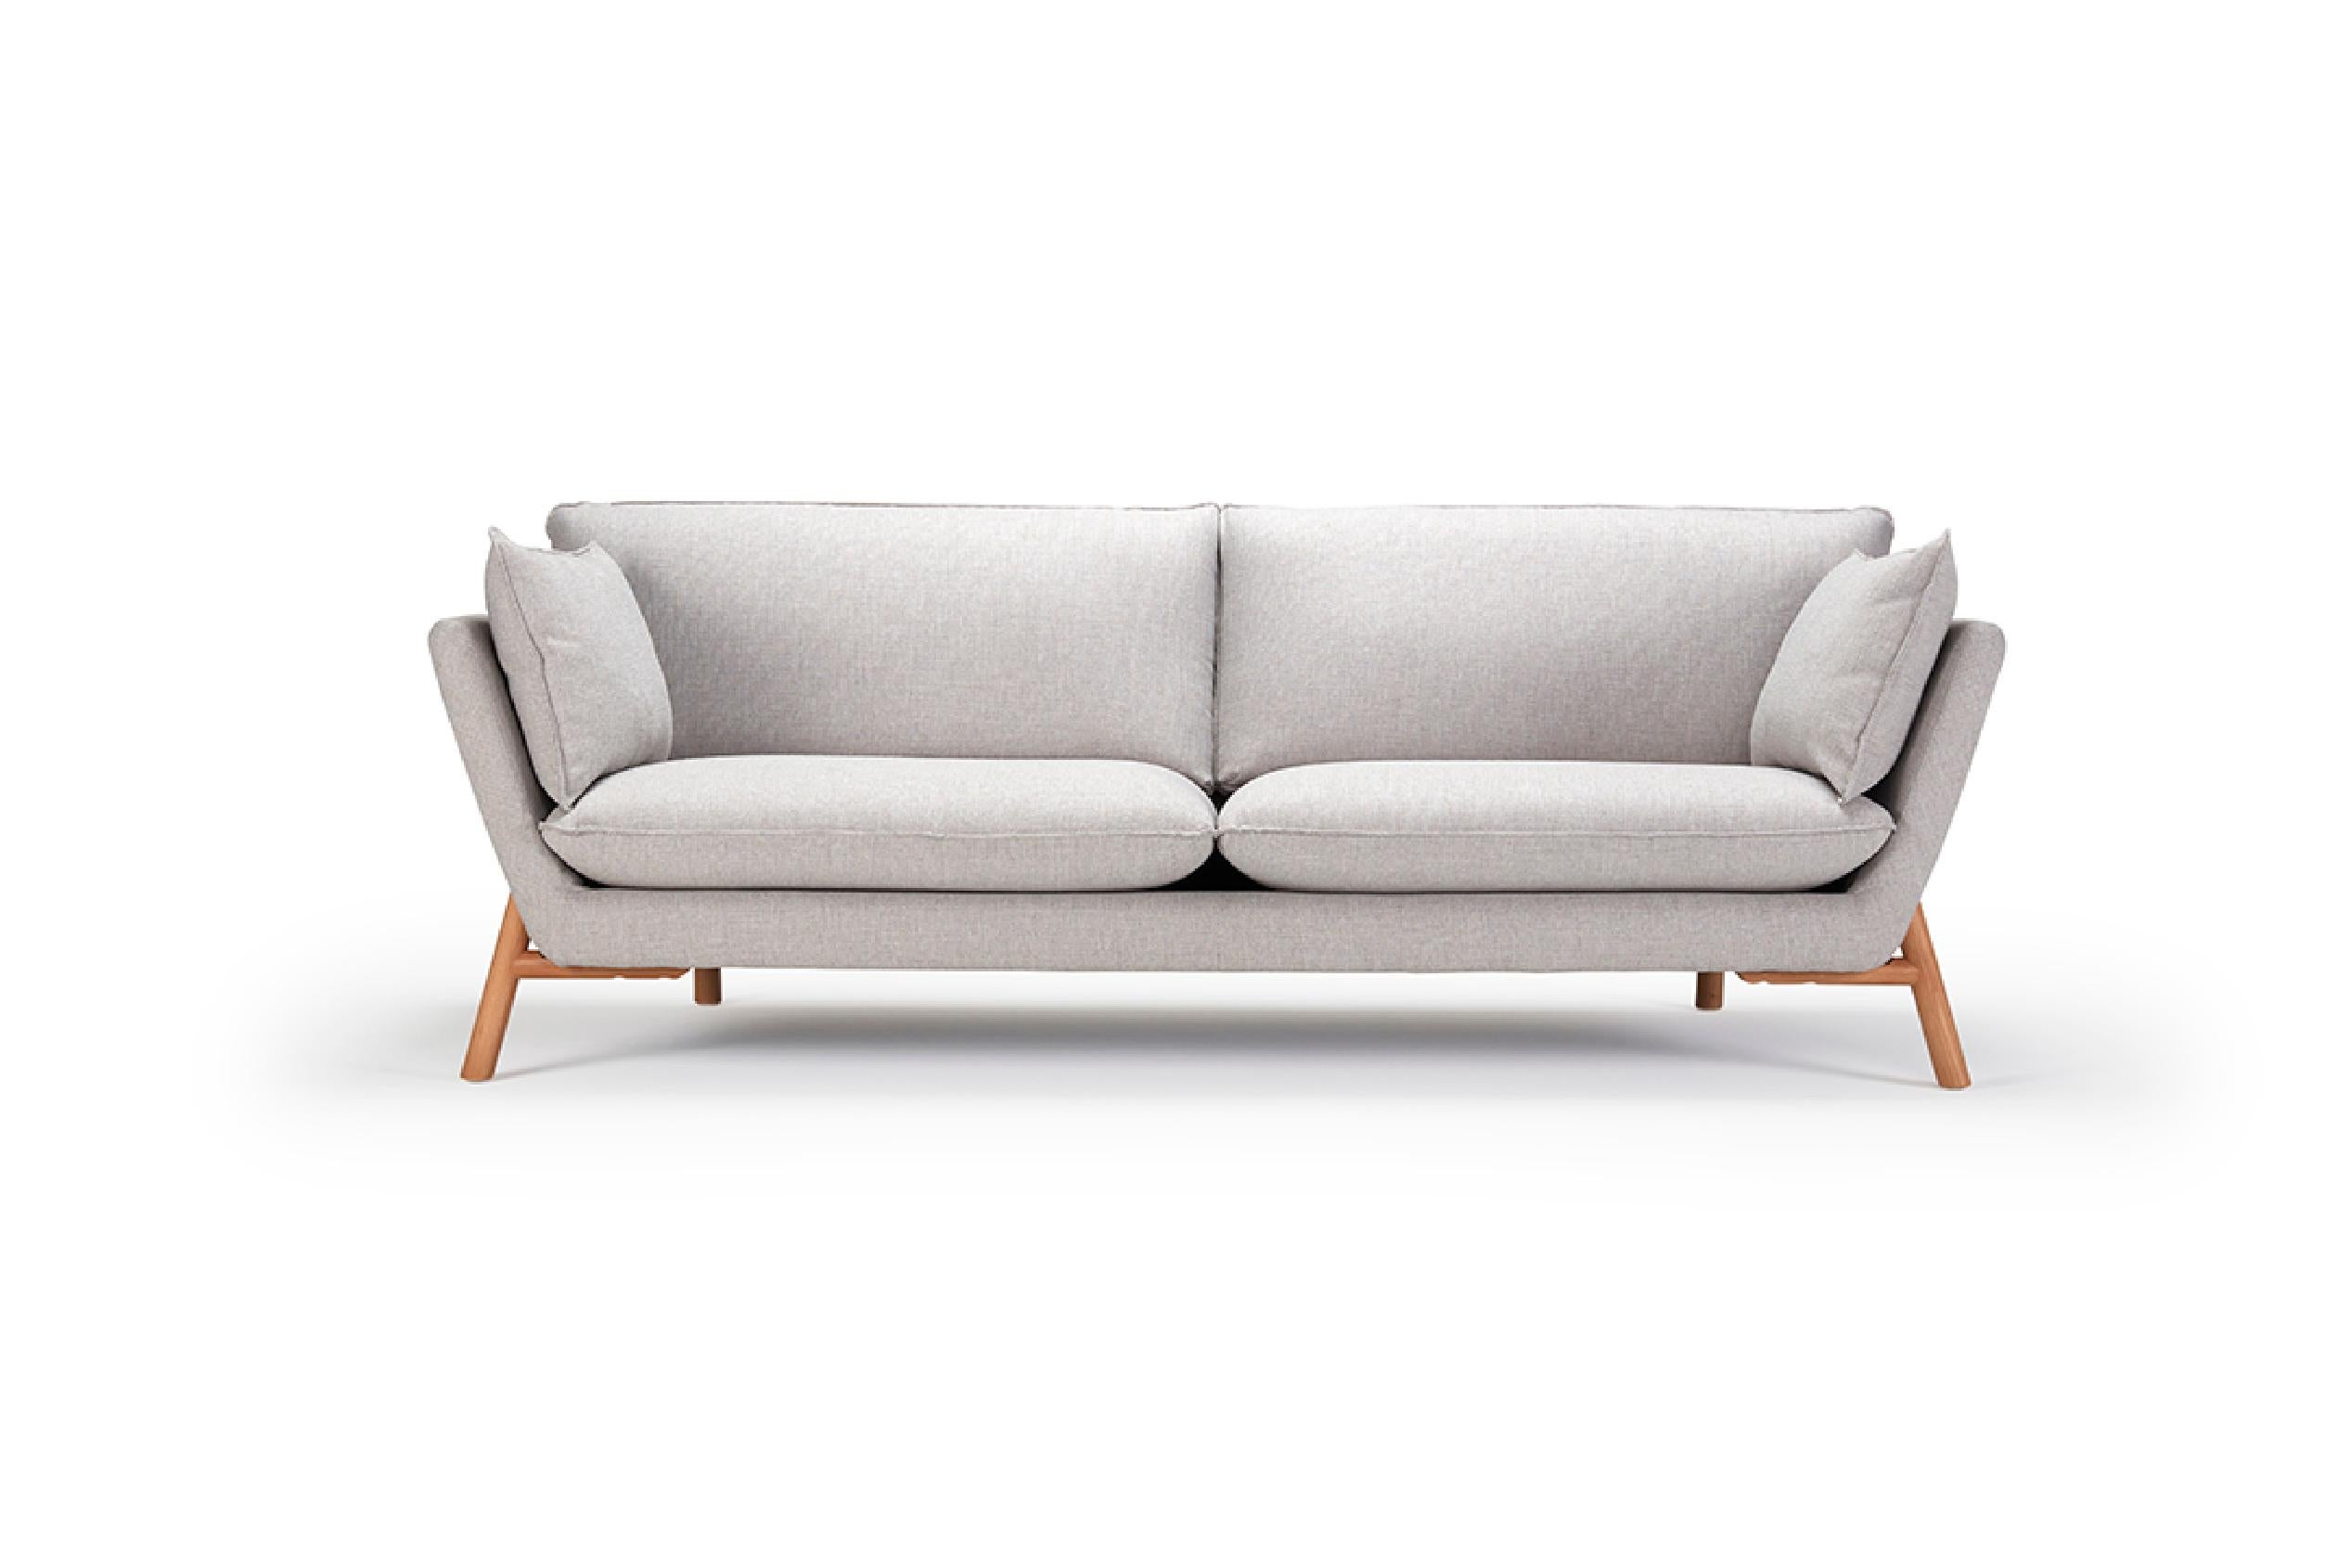 Modern Hayche Nave 2 Seater Sofa - Grey, UK, Made to Order For Sale